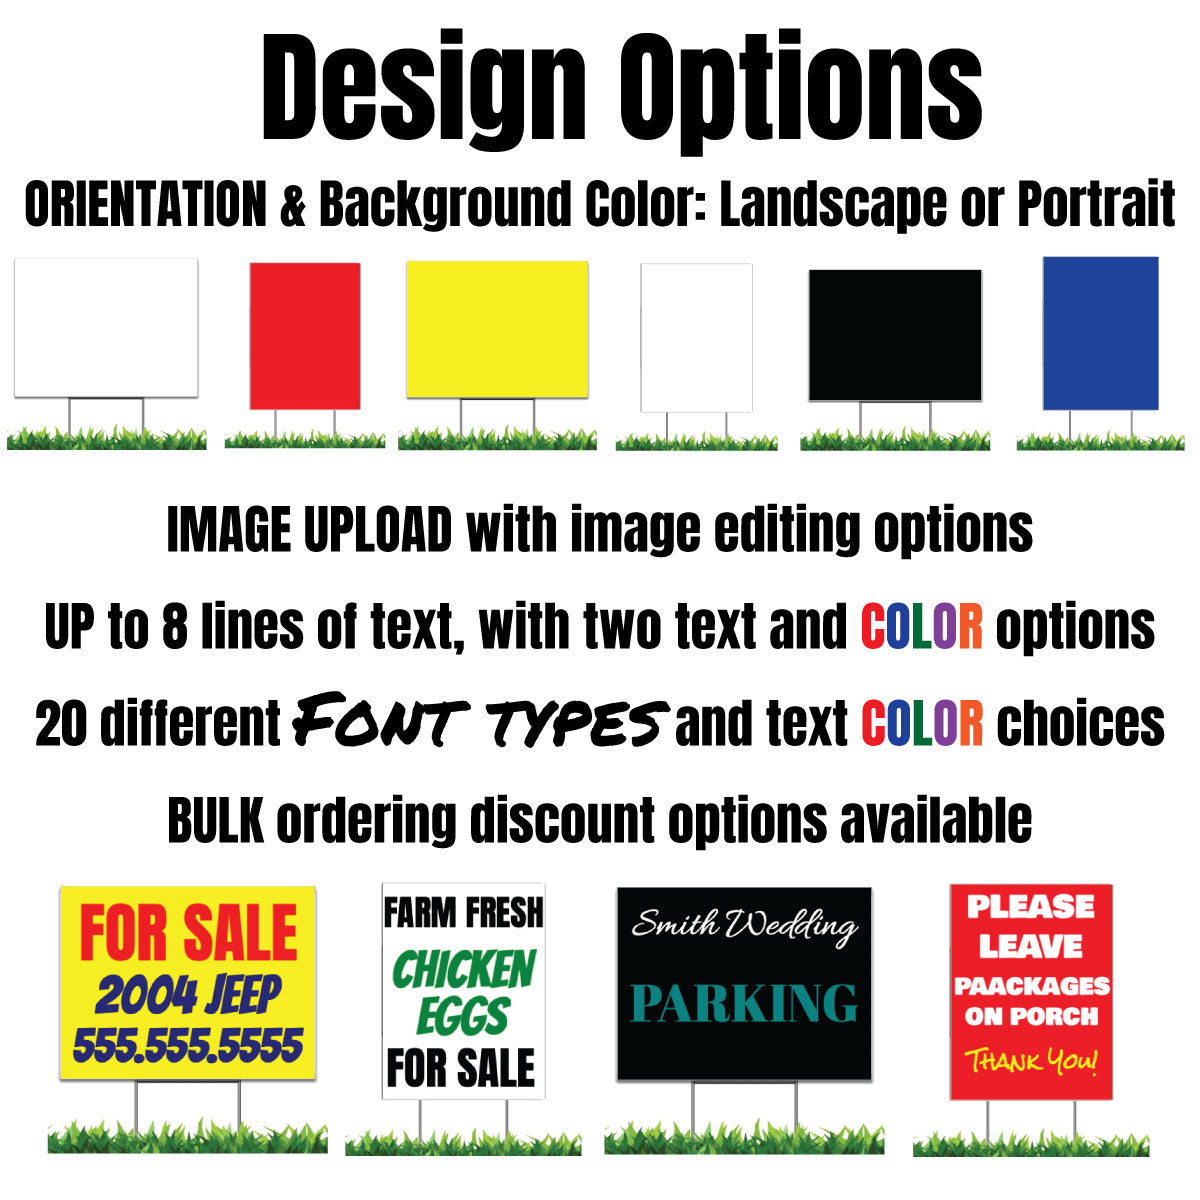 Custom Yard Signs, 1000 Pack (QTY1000), Personalize Yard Sign, 24 x 18 inch, Double Sided, H-Stake Included